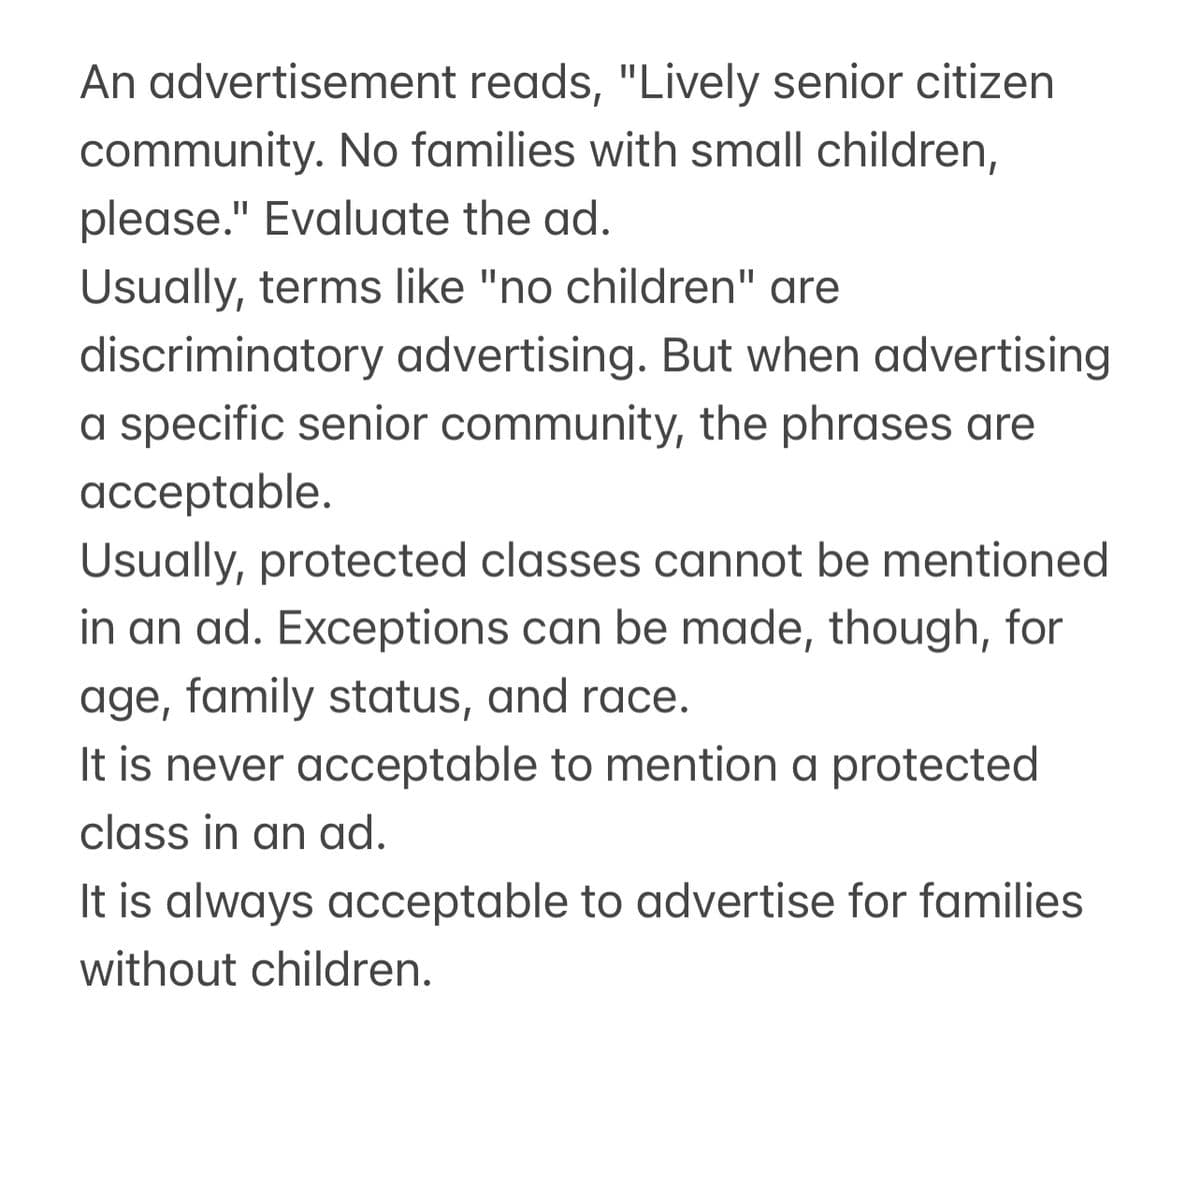 An advertisement reads, "Lively senior citizen
community. No families with small children,
please." Evaluate the ad.
Usually, terms like "no children" are
discriminatory advertising. But when advertising
a specific senior community, the phrases are
acceptable.
Usually, protected classes cannot be mentioned
in an ad. Exceptions can be made, though, for
age, family status, and race.
It is never acceptable to mention a protected
class in an ad.
It is always acceptable to advertise for families
without children.